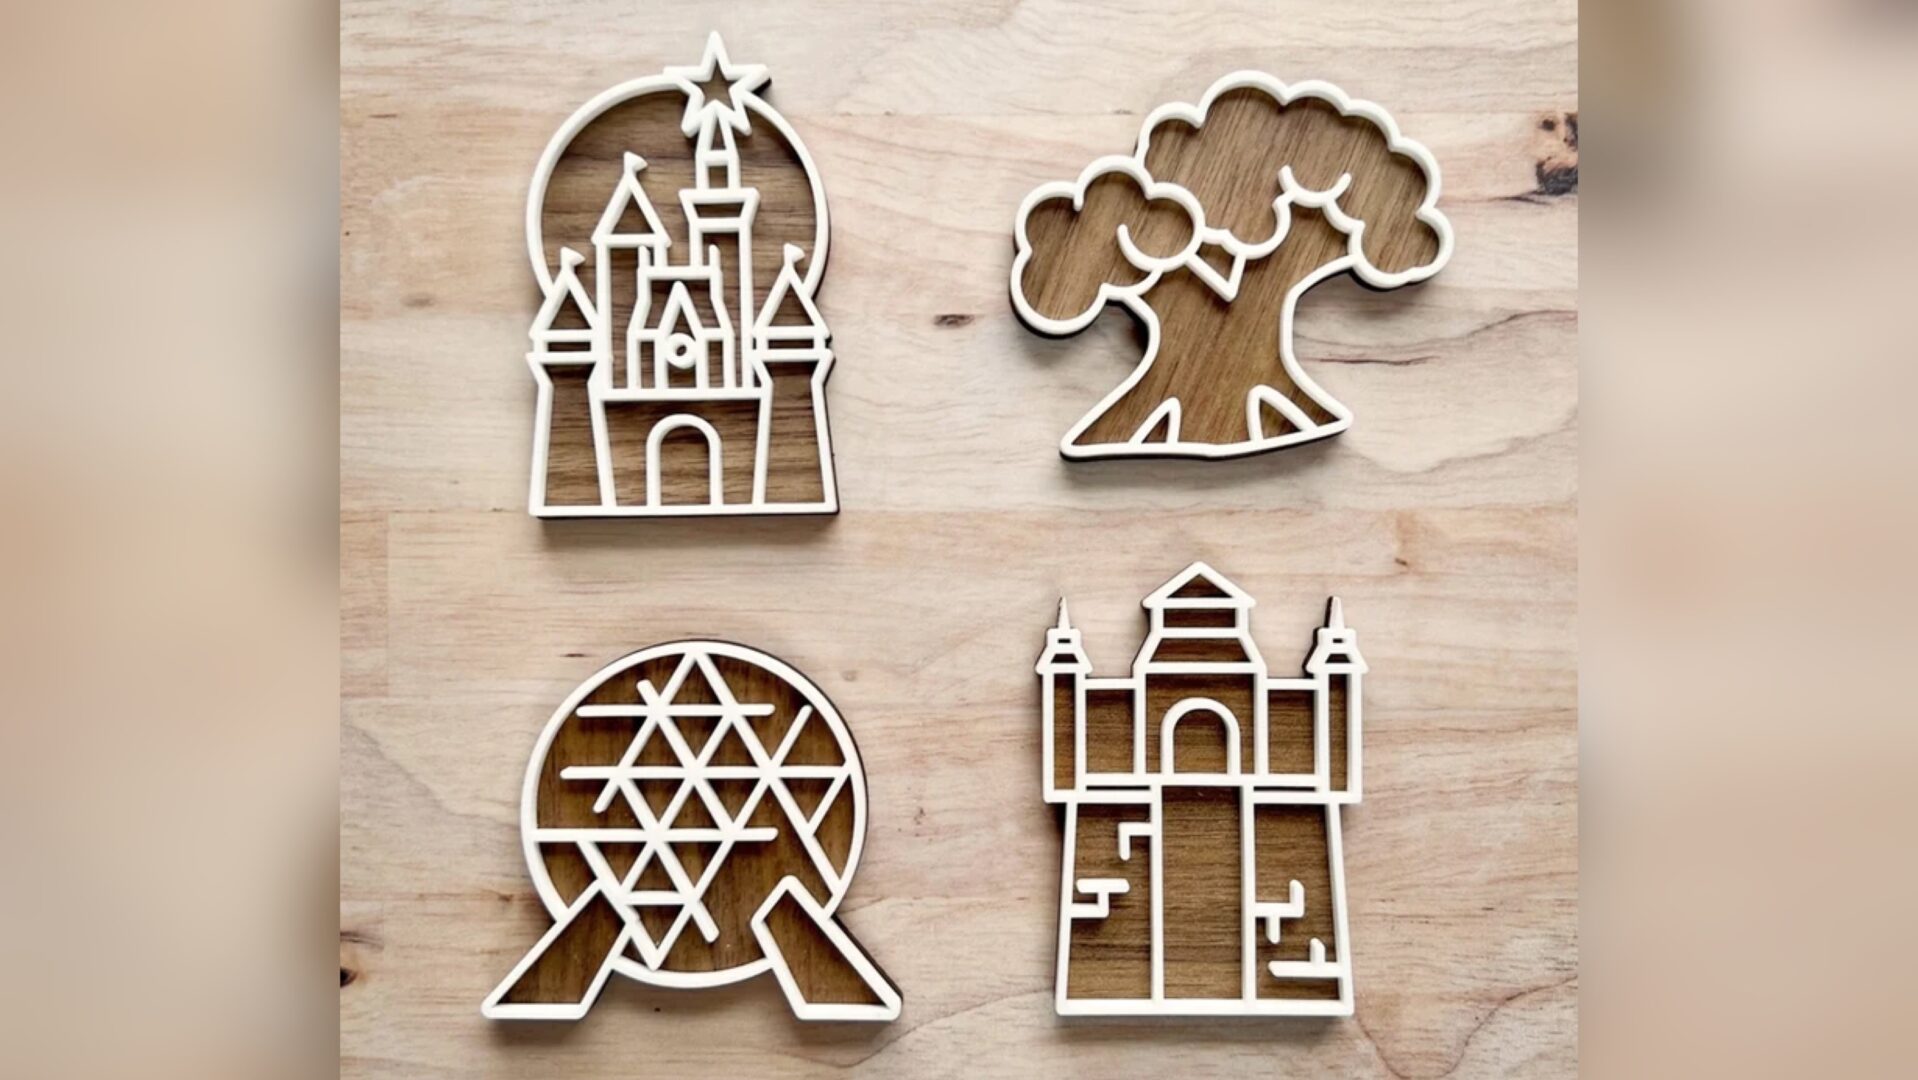 Disney Parks Magnets To Add Magic To Your Fridge!